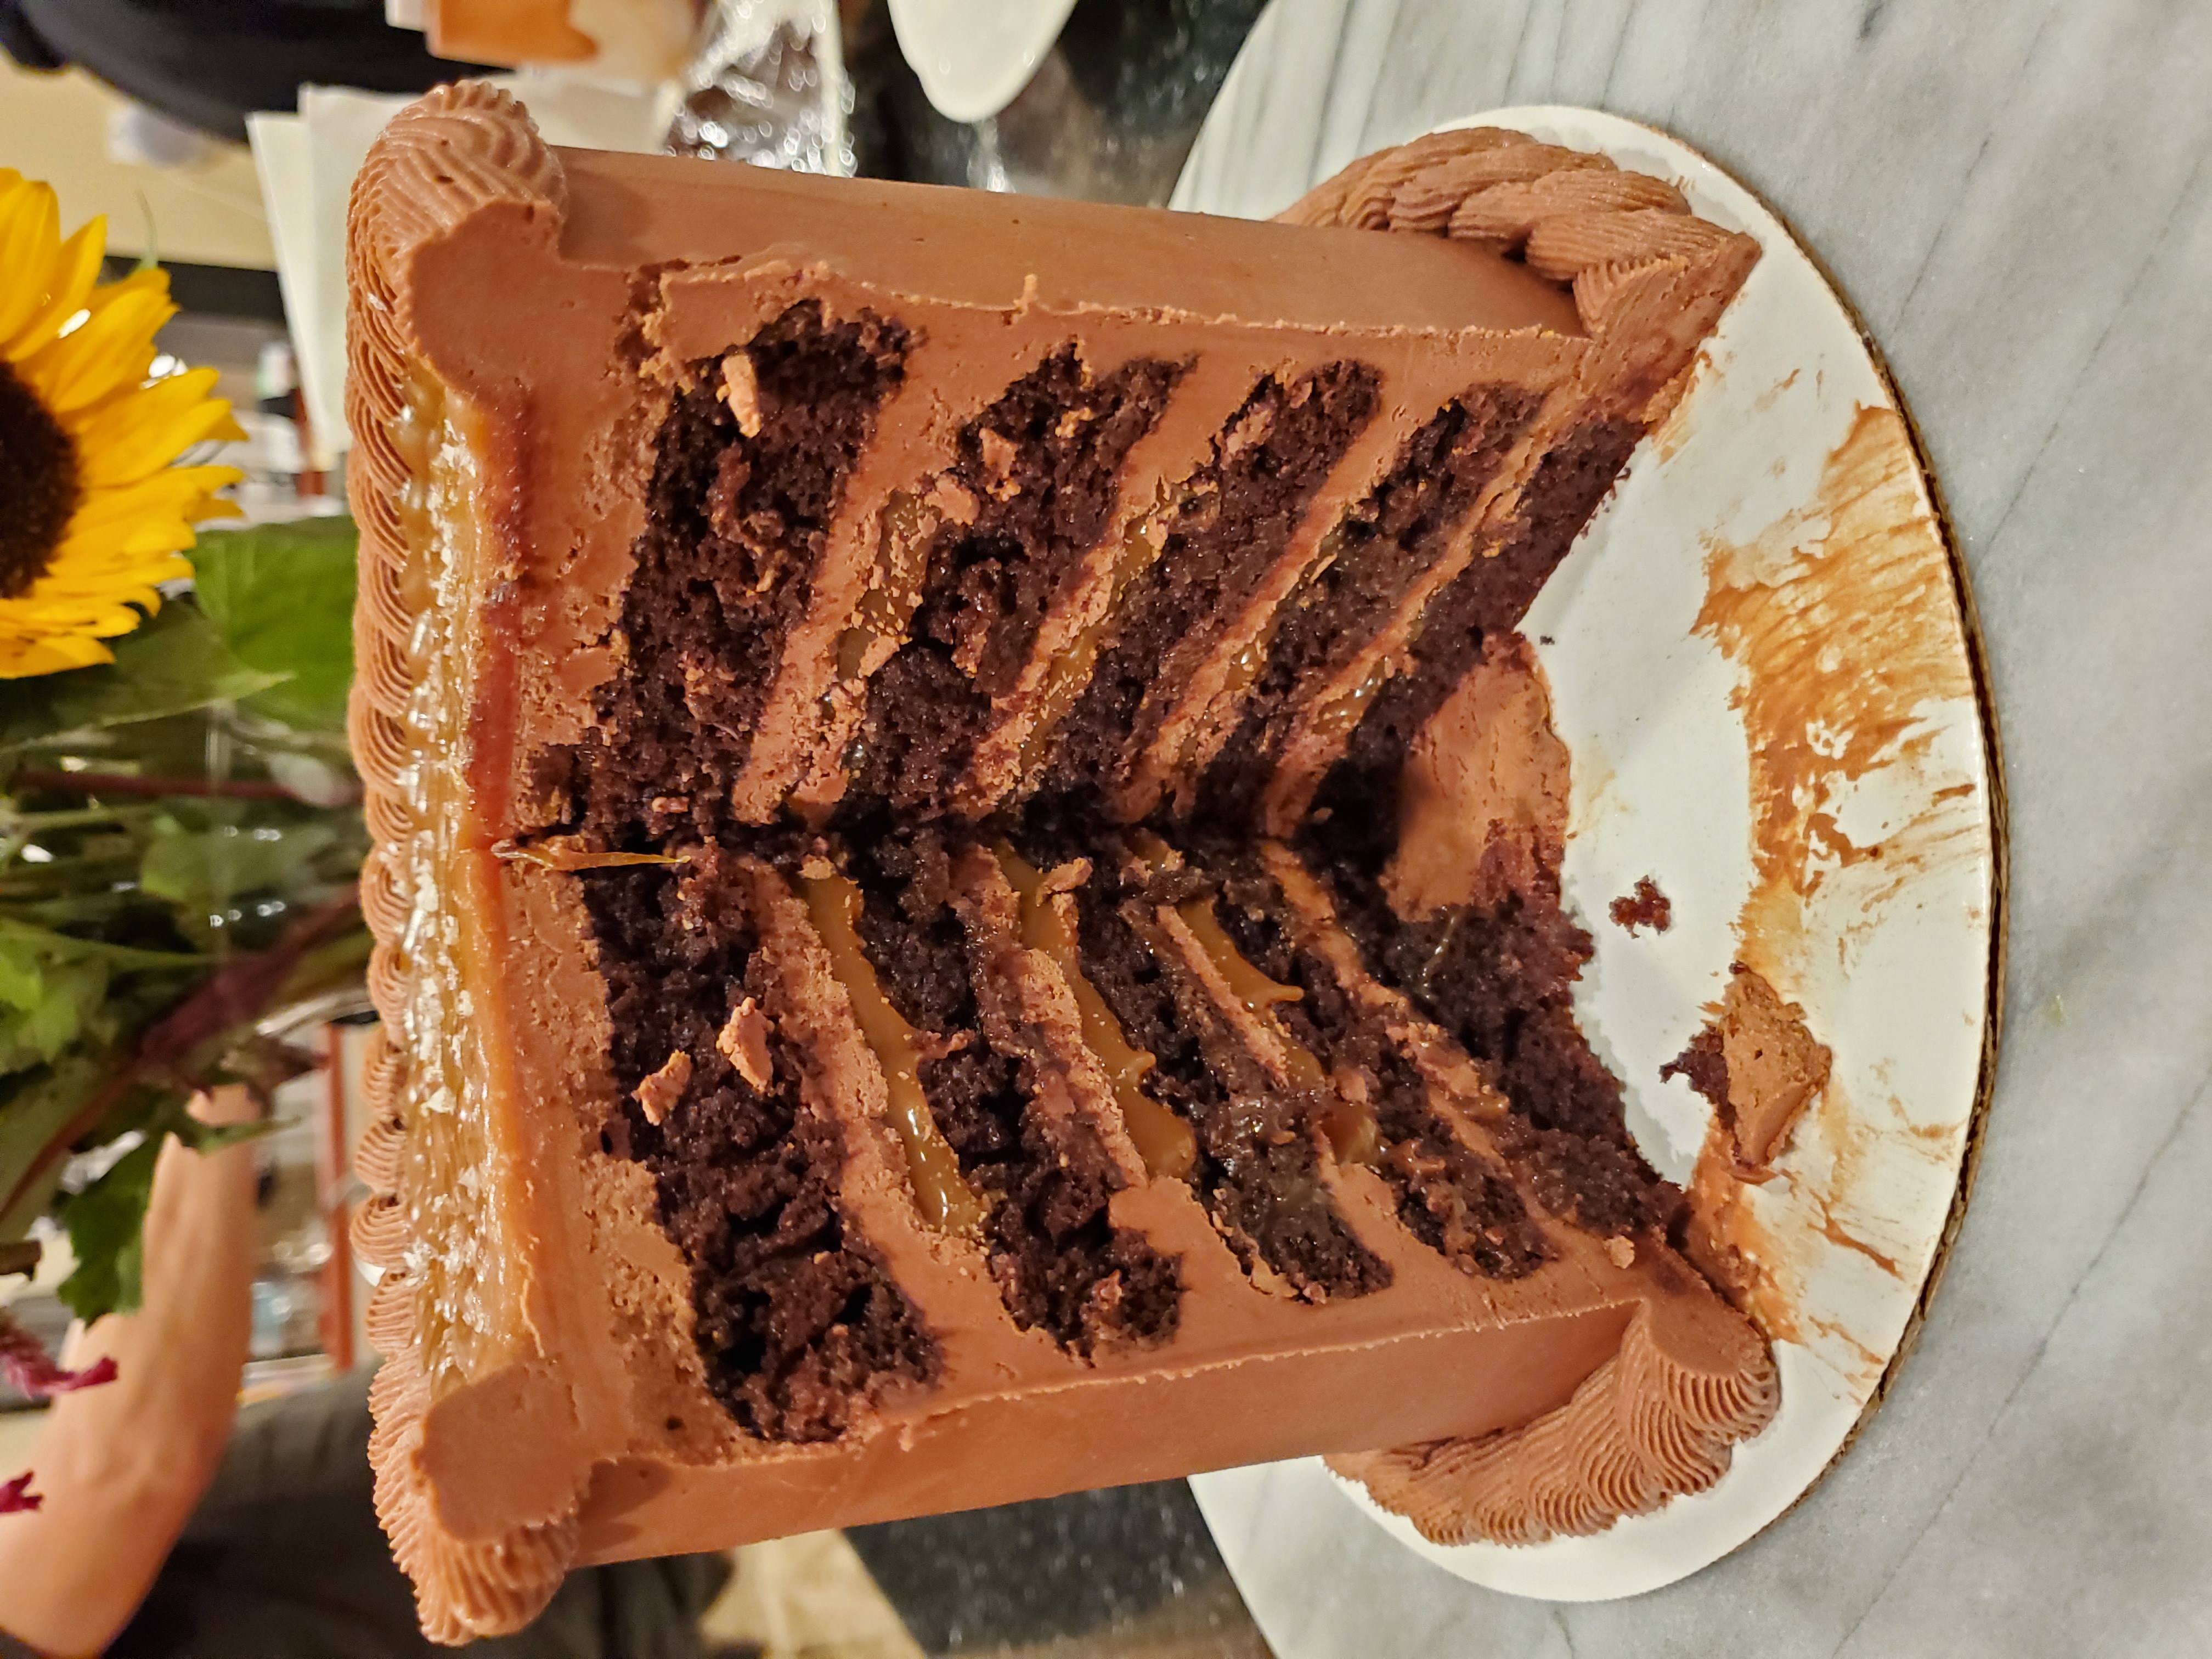 A five layer chocolate cake with gooey caramel in between each layer on a grey granite turn table on a black granite coutertop.